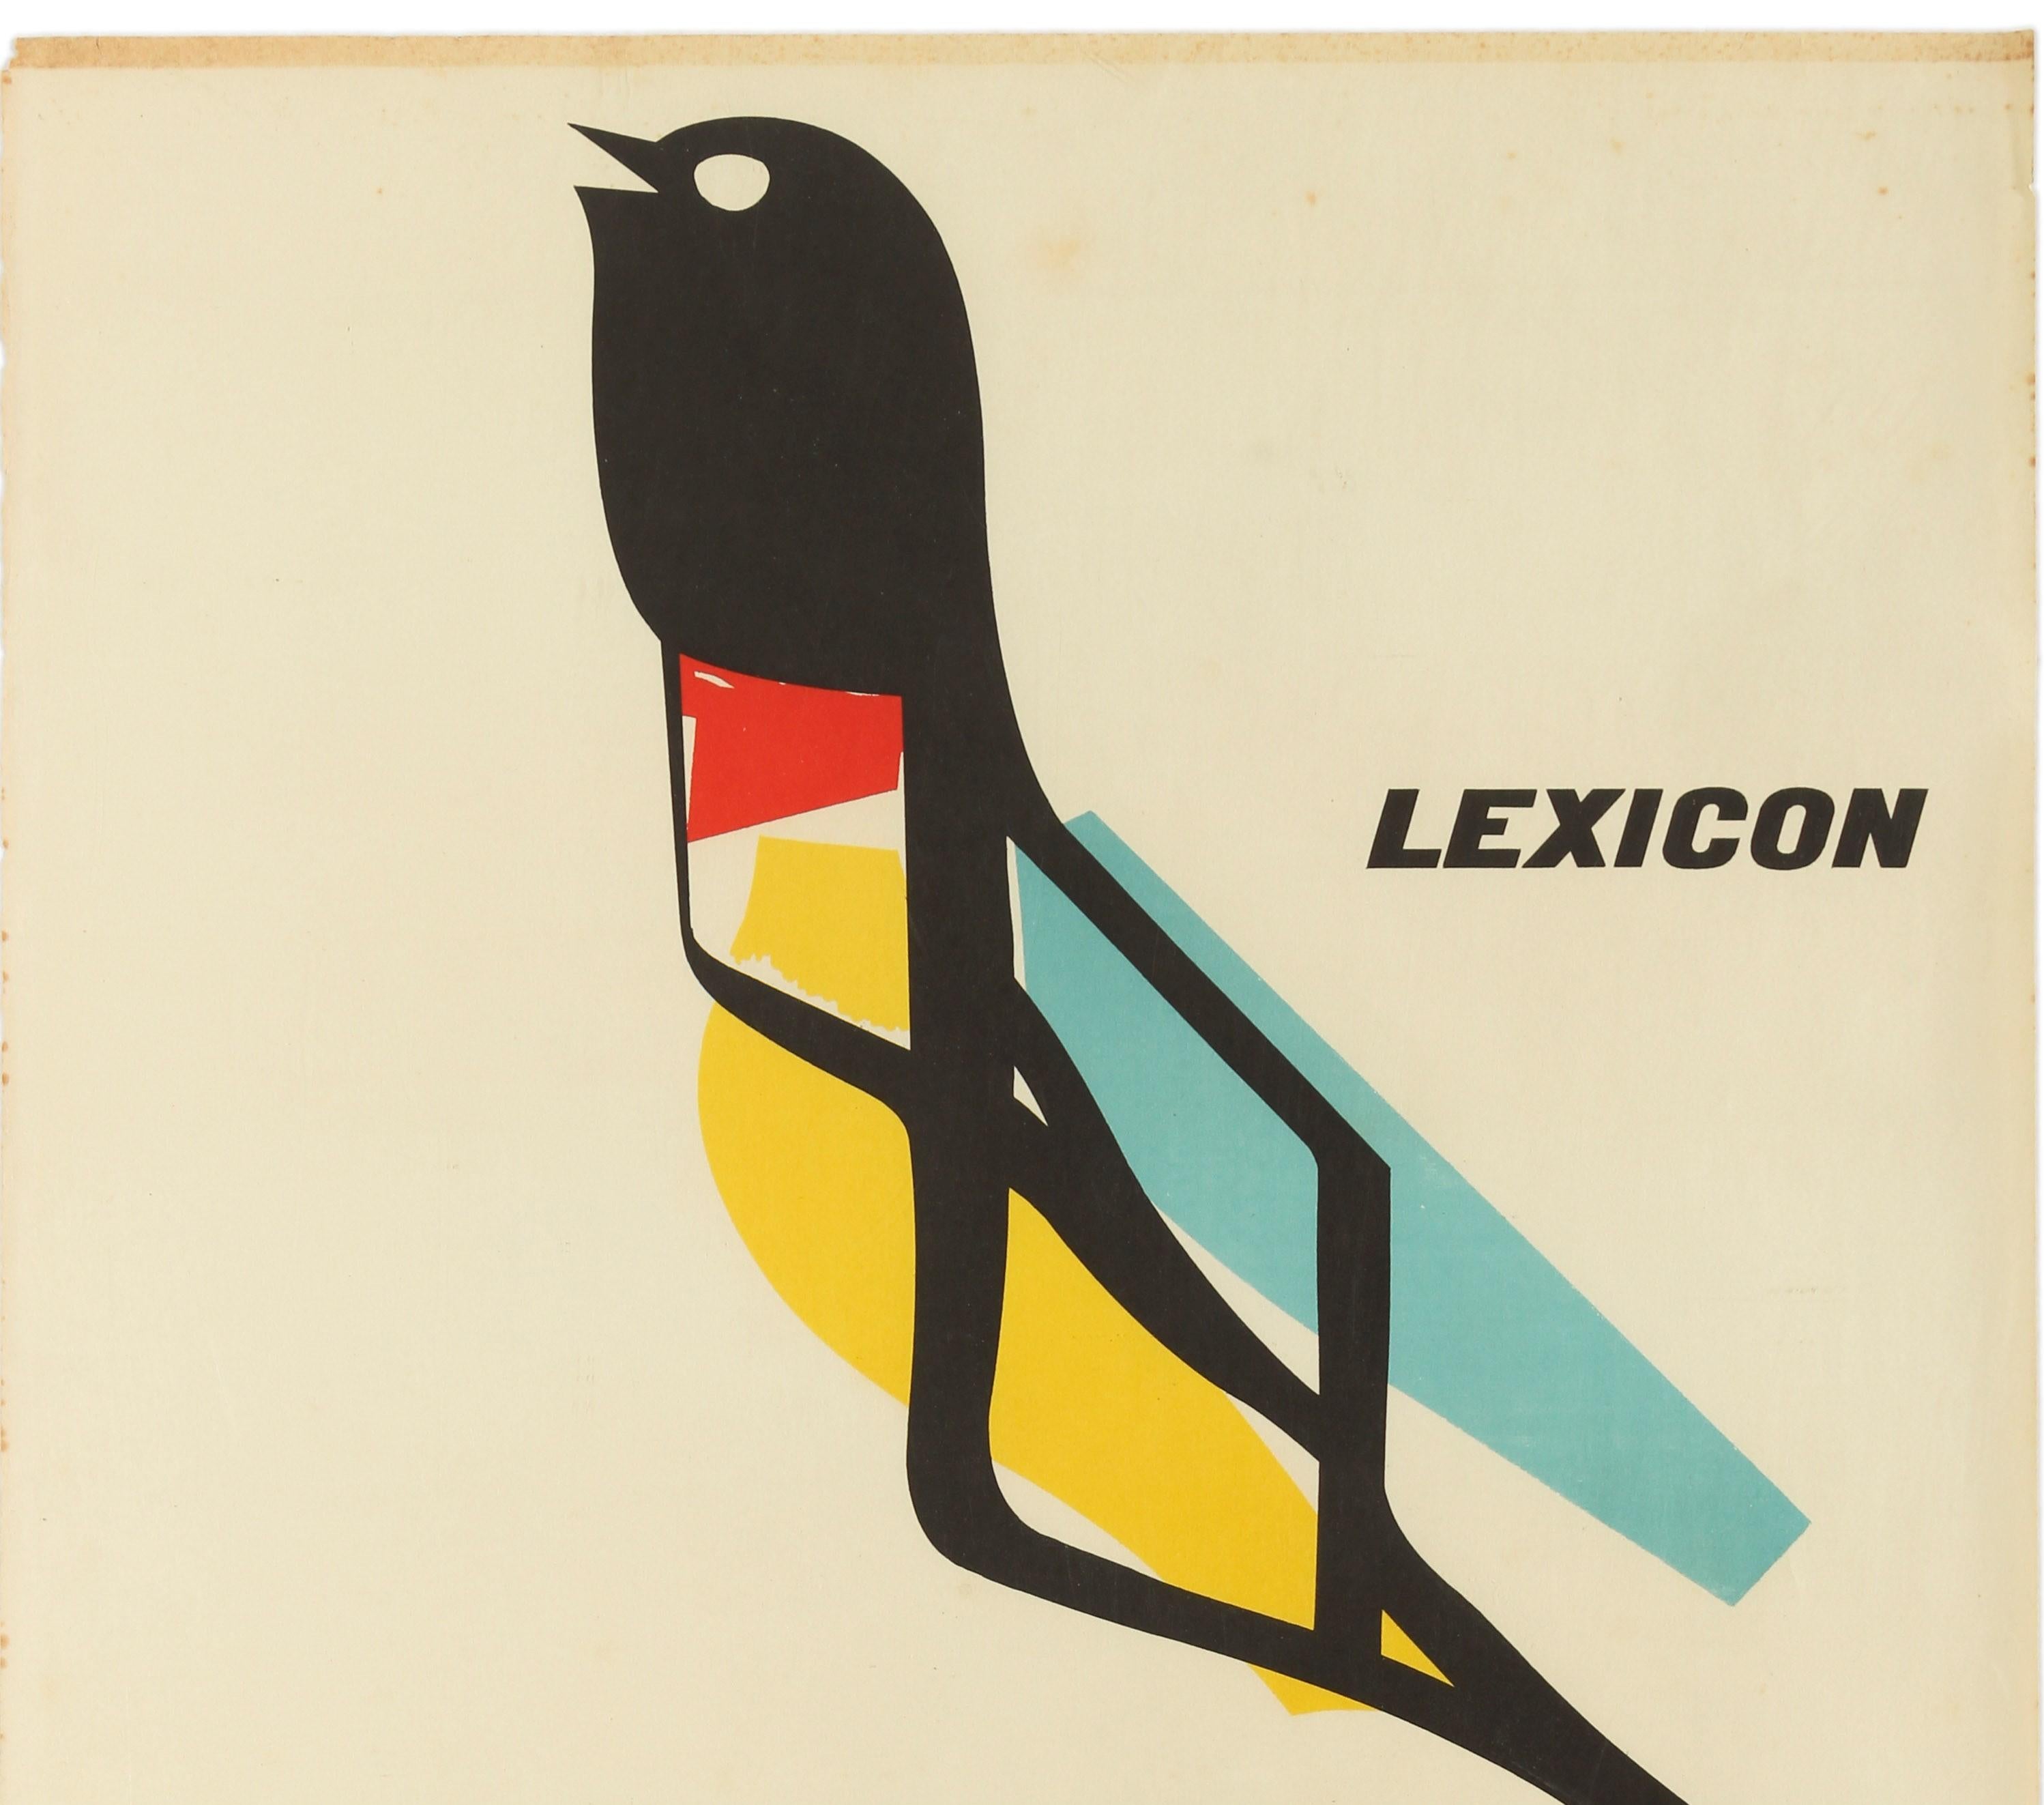 Original vintage Avant Garde advertising poster for the Lexicon Hispano Olivetti 80 typewriter model featuring a great mid-century graphic design depicting a colourful bird flying above a photograph of a new Olivetti typewriter with the stylised